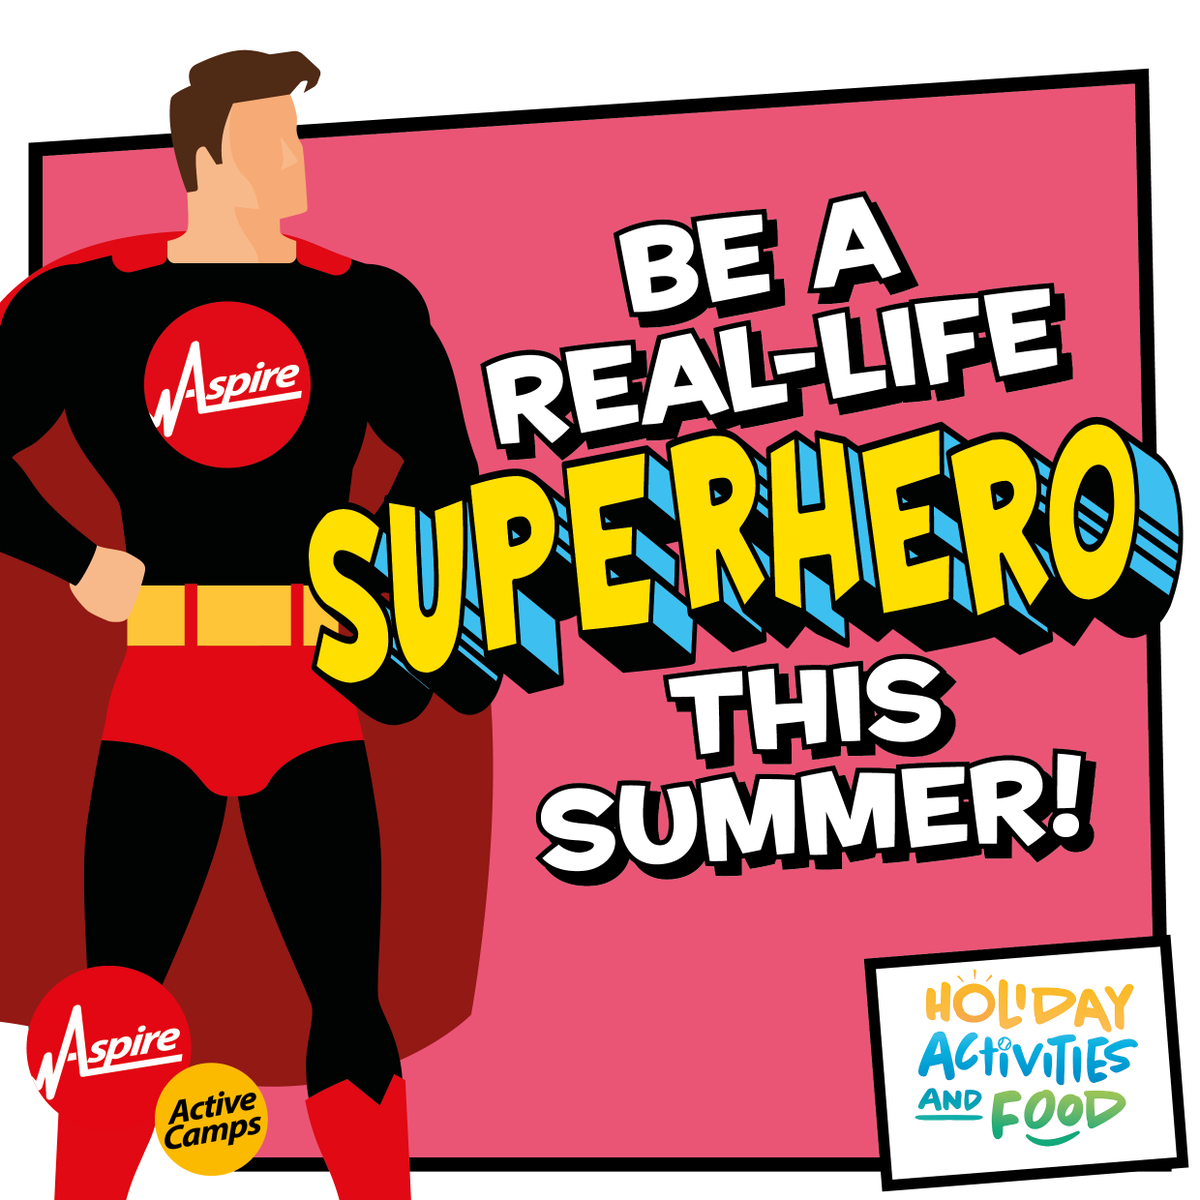 🏆 Why work for Aspire Active Camps this summer?
✅ Flexible hours
✅ Competitive pay
✅ Opportunities for career growth
Don't miss out, apply now! #summerjobs #sportsjobs

🔗 Apply here: hubs.ly/Q01Vpx6P0